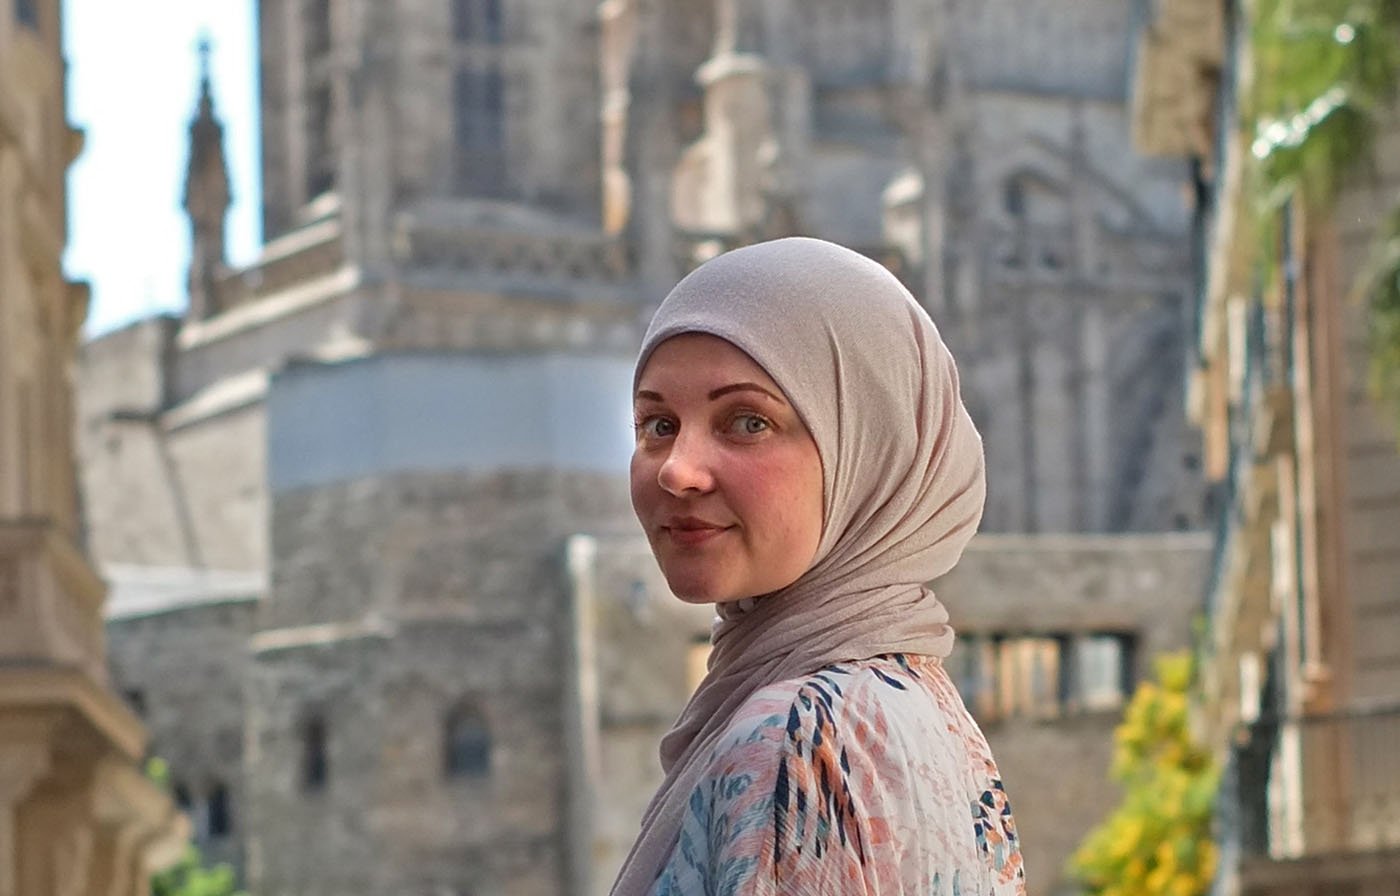 Diana Demchenko, a Muslim convert, photographed in Barcelona last year, now lives in Orange County, California.